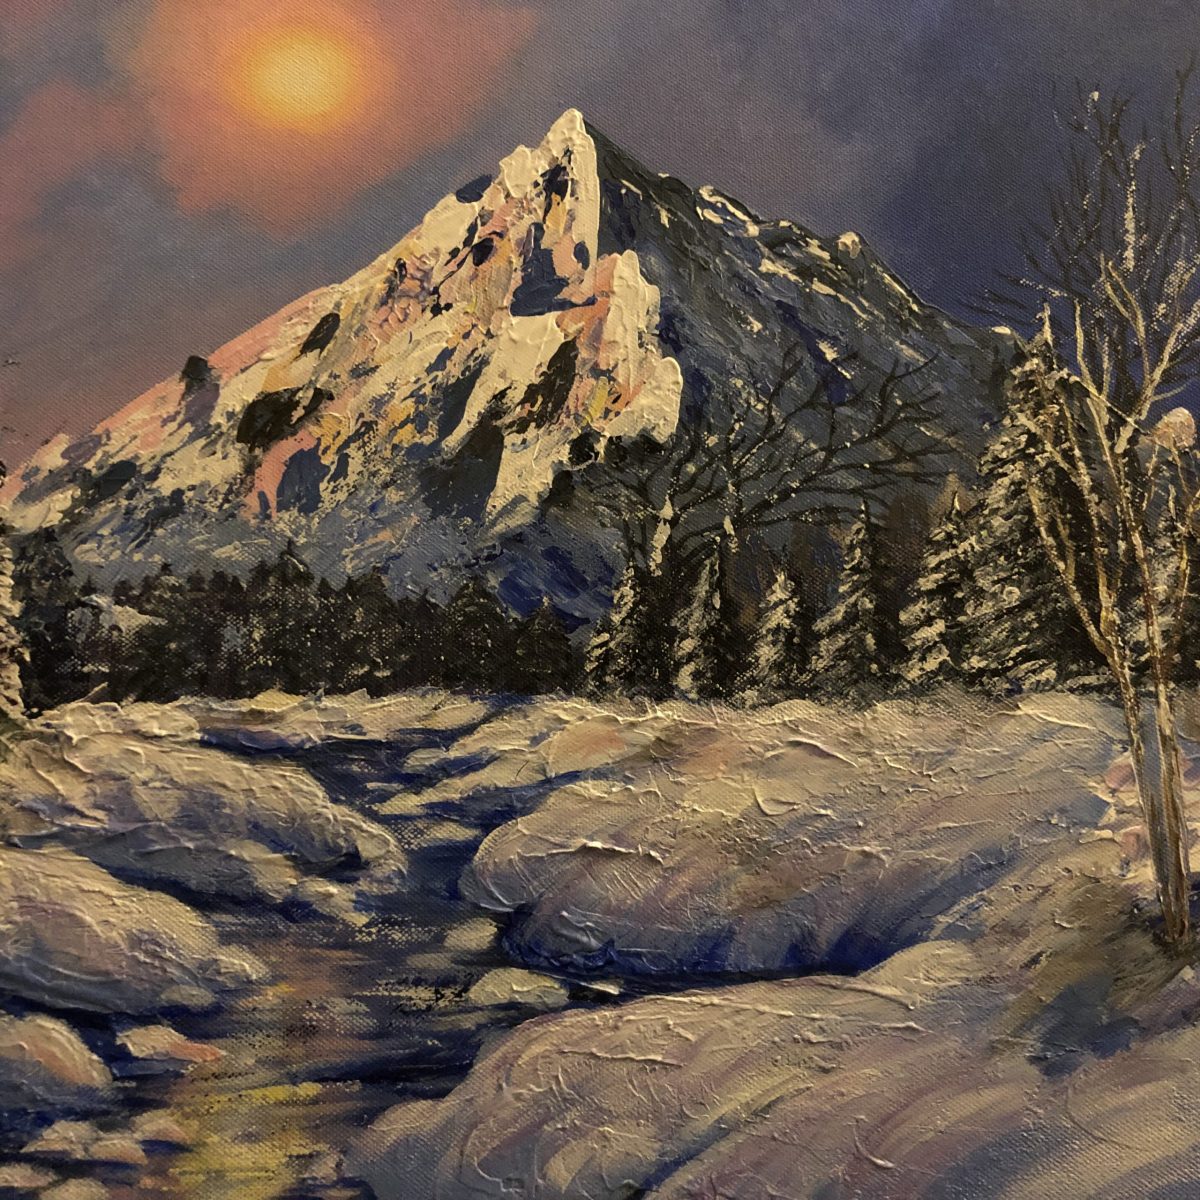 a snowy ewening - A snowy evening, close-up on the mountain